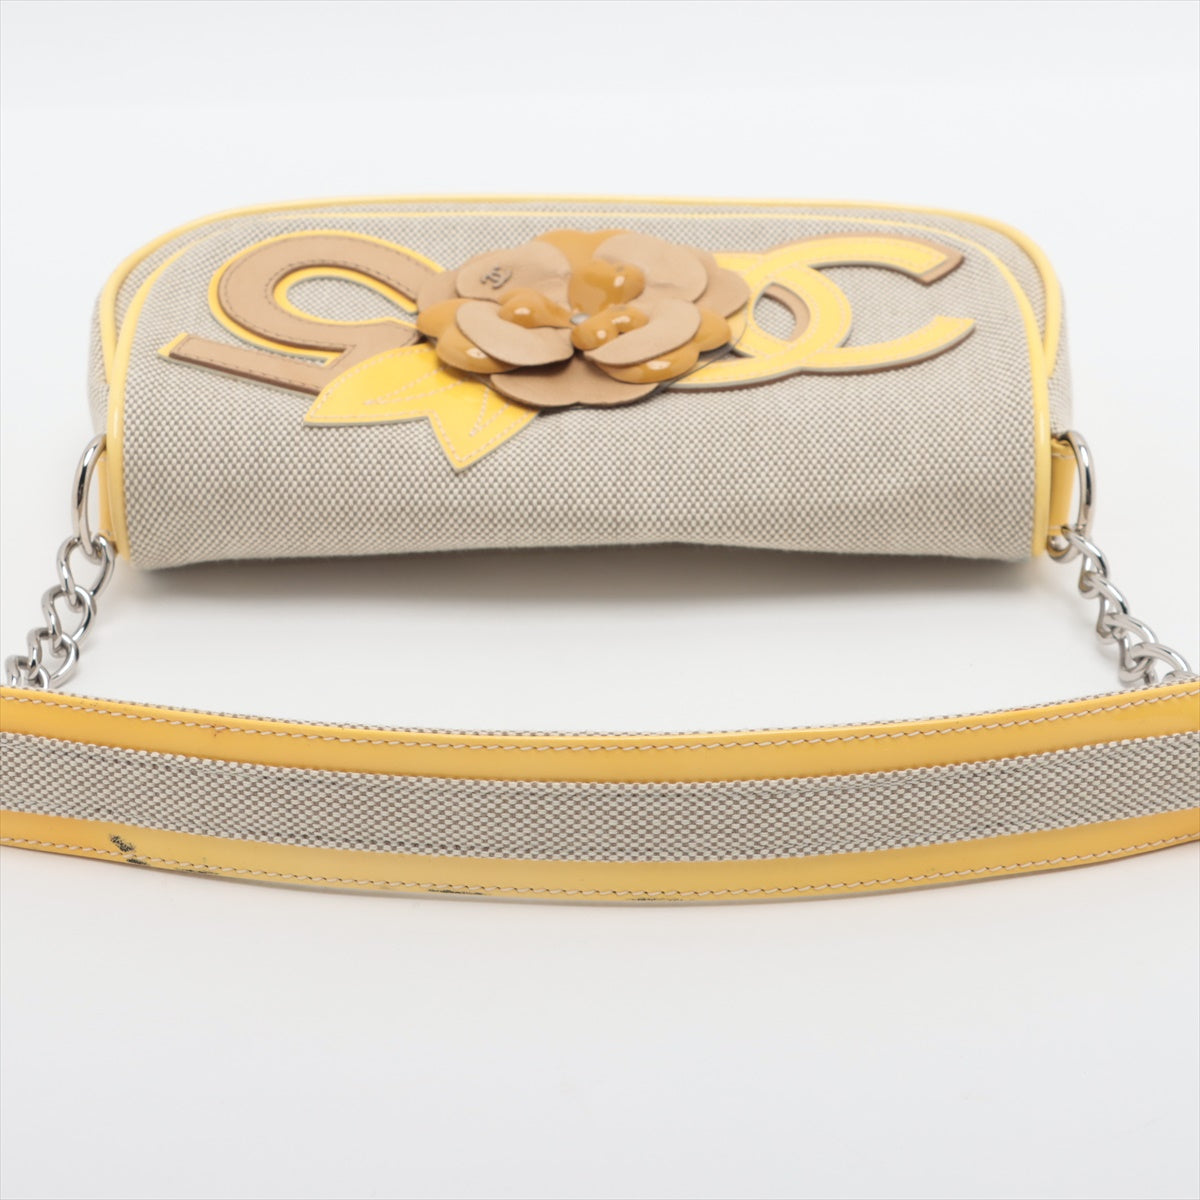 Chanel Camelia Canvas × Patent Leather Chain Shoulder Bag Yellow Silver Metal Fittings 10XXXXXX